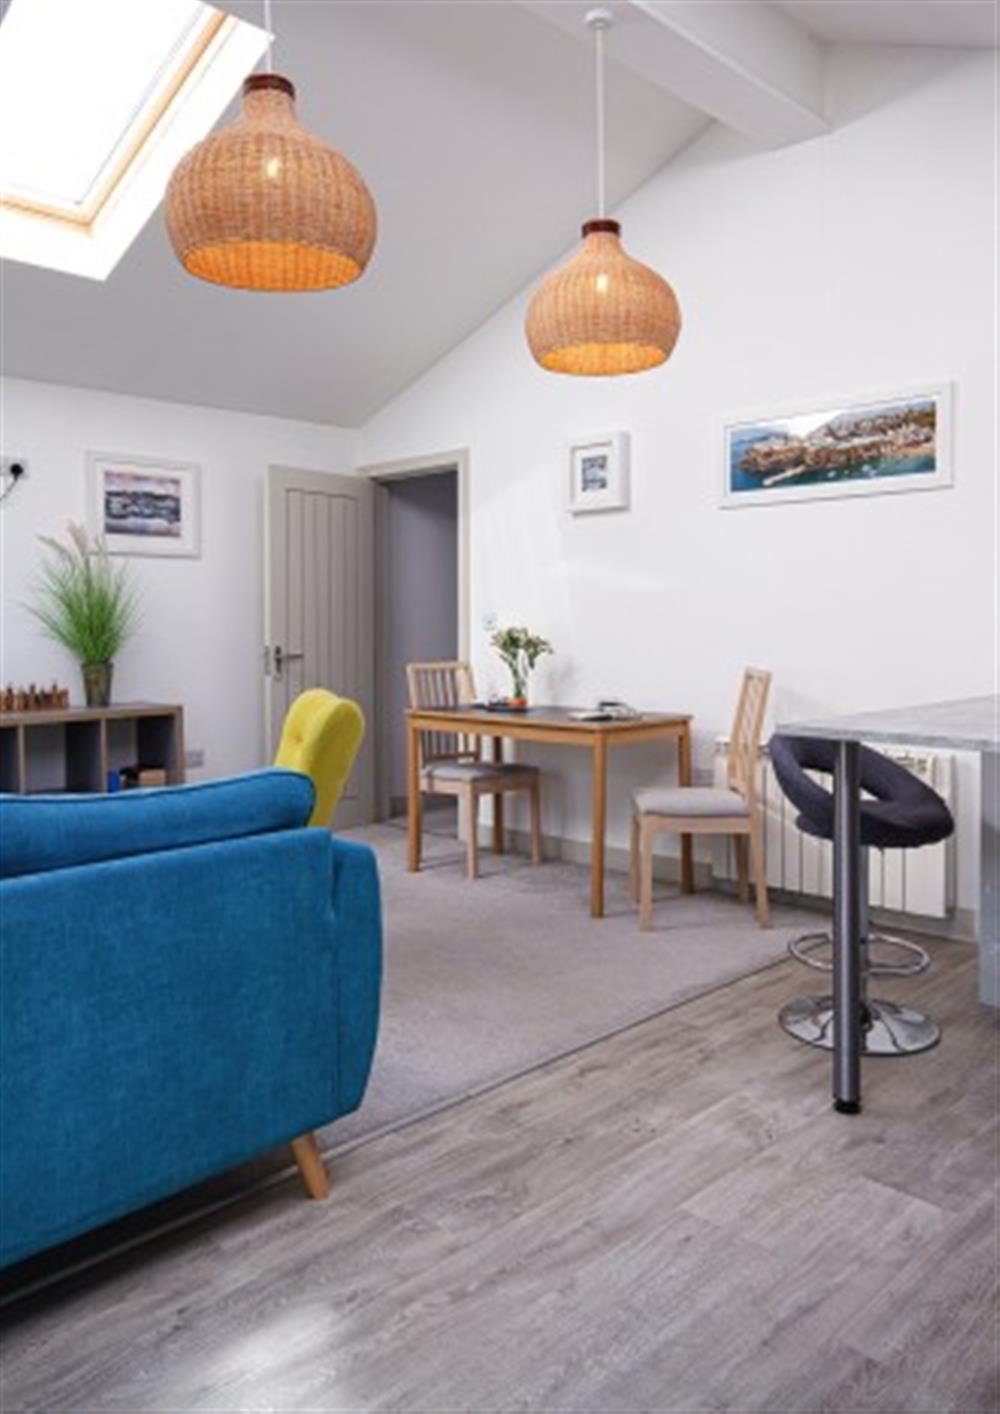 Living space continued at Lowen Lodge in Polzeath